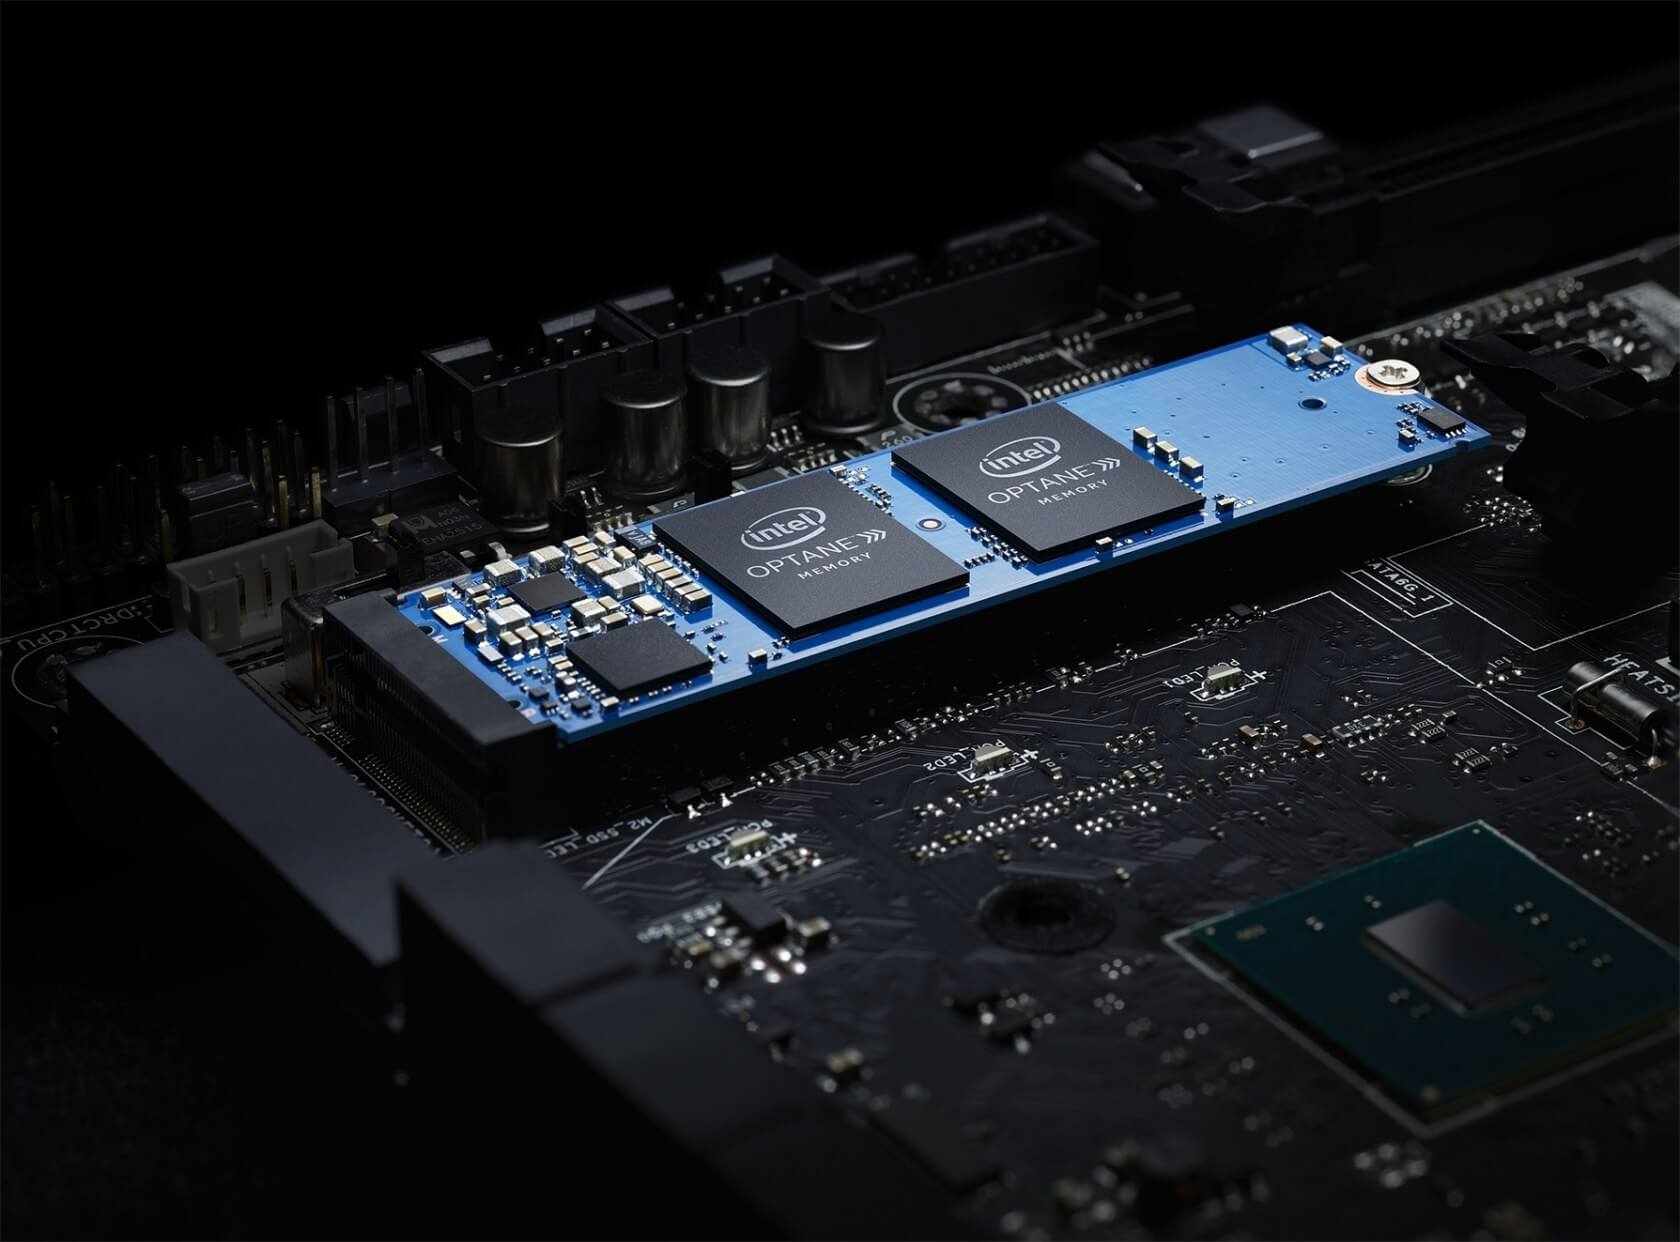 Optane cache drives are not DRAM, but that's not what Intel and OEMs would have you believe